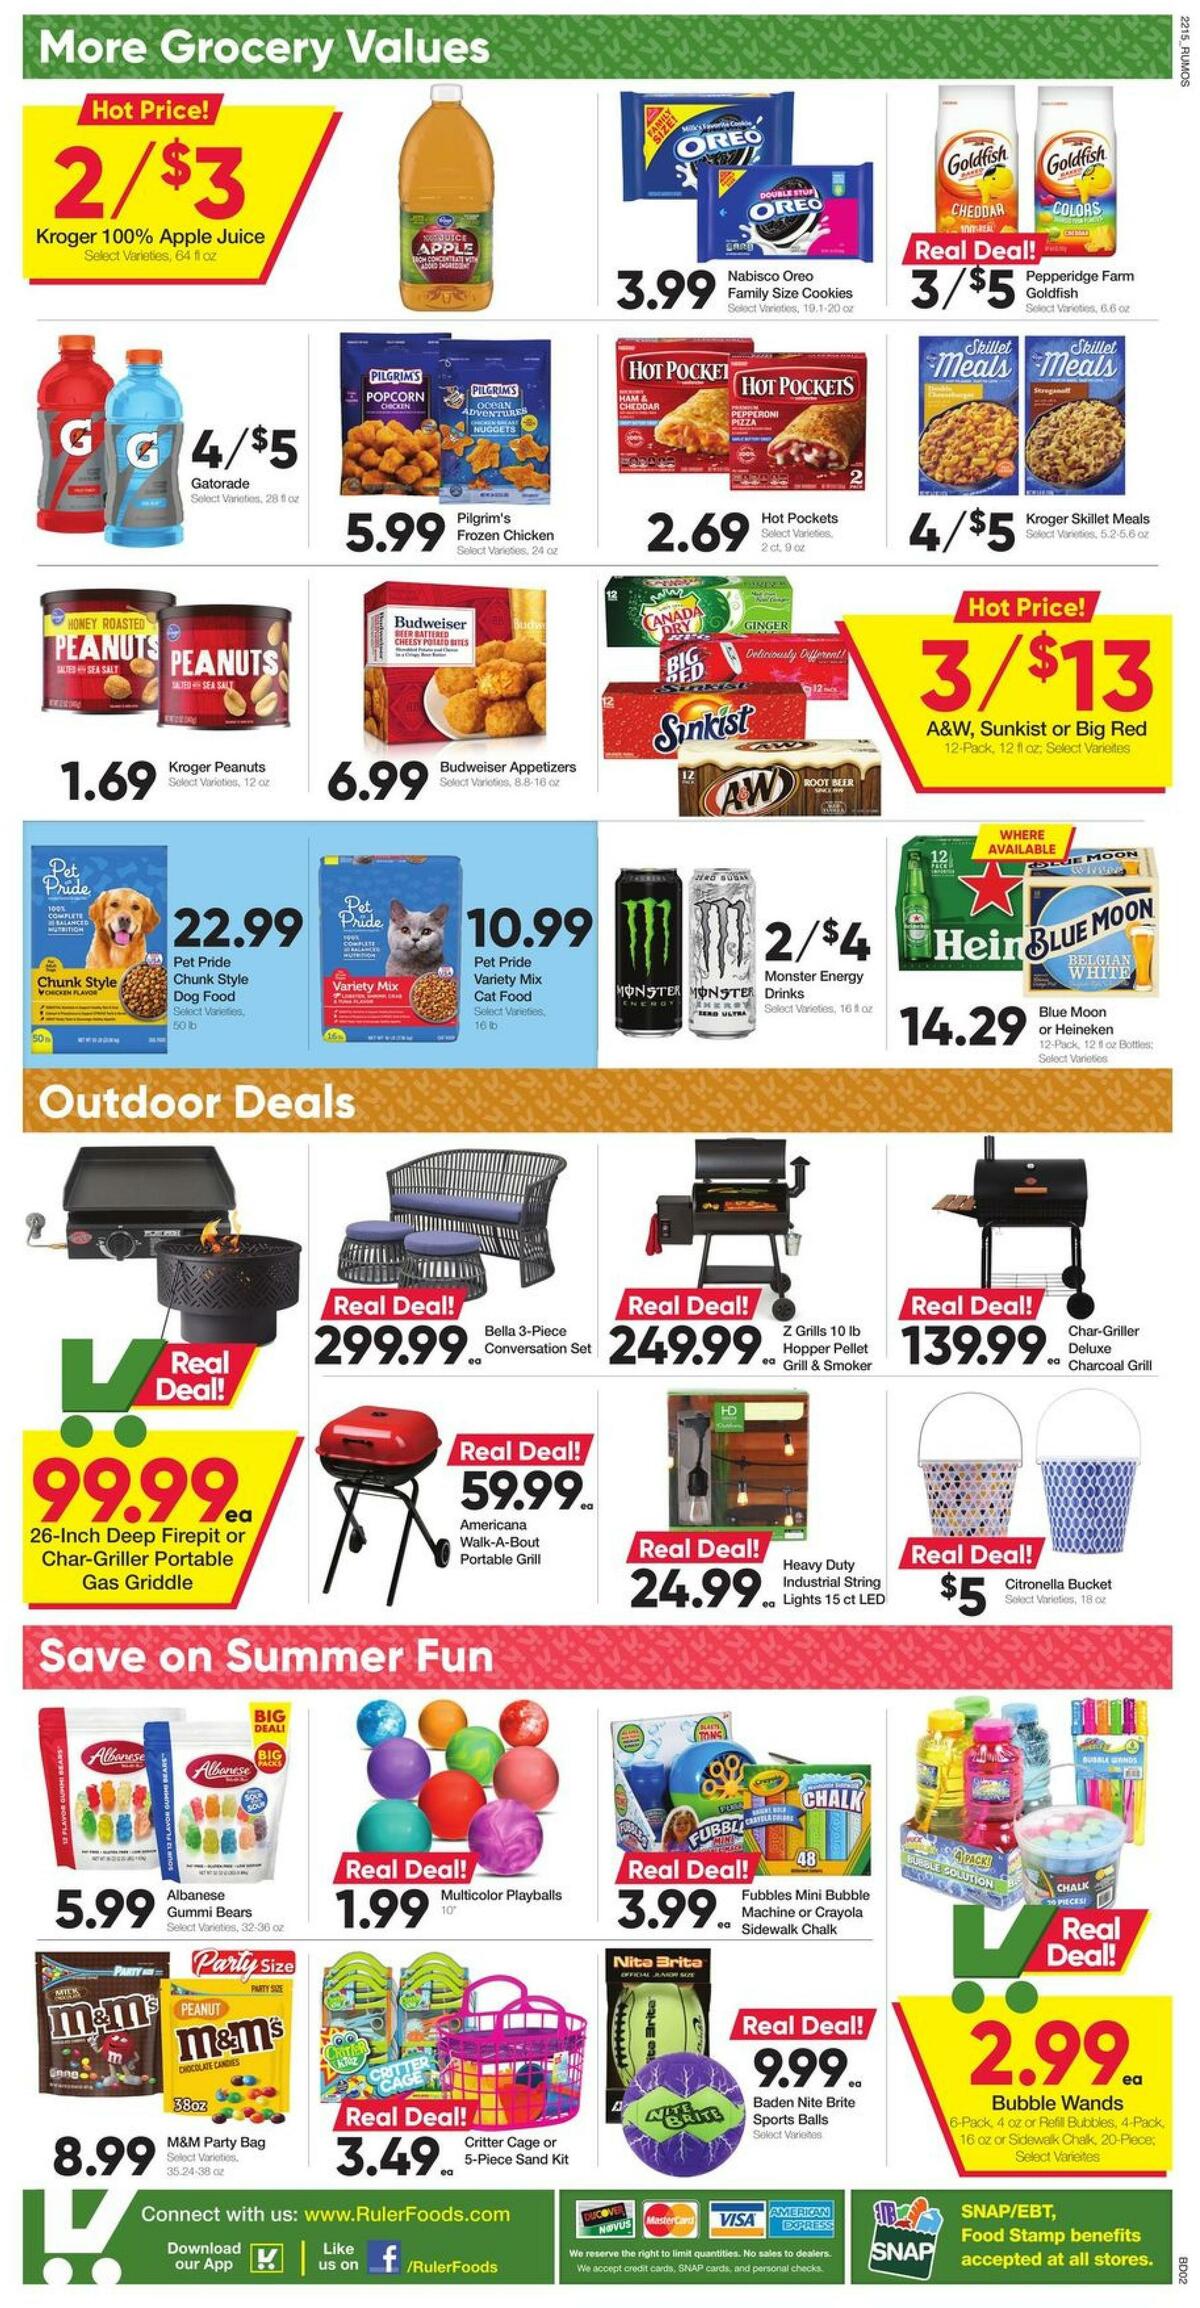 Ruler Foods Weekly Ad from May 11